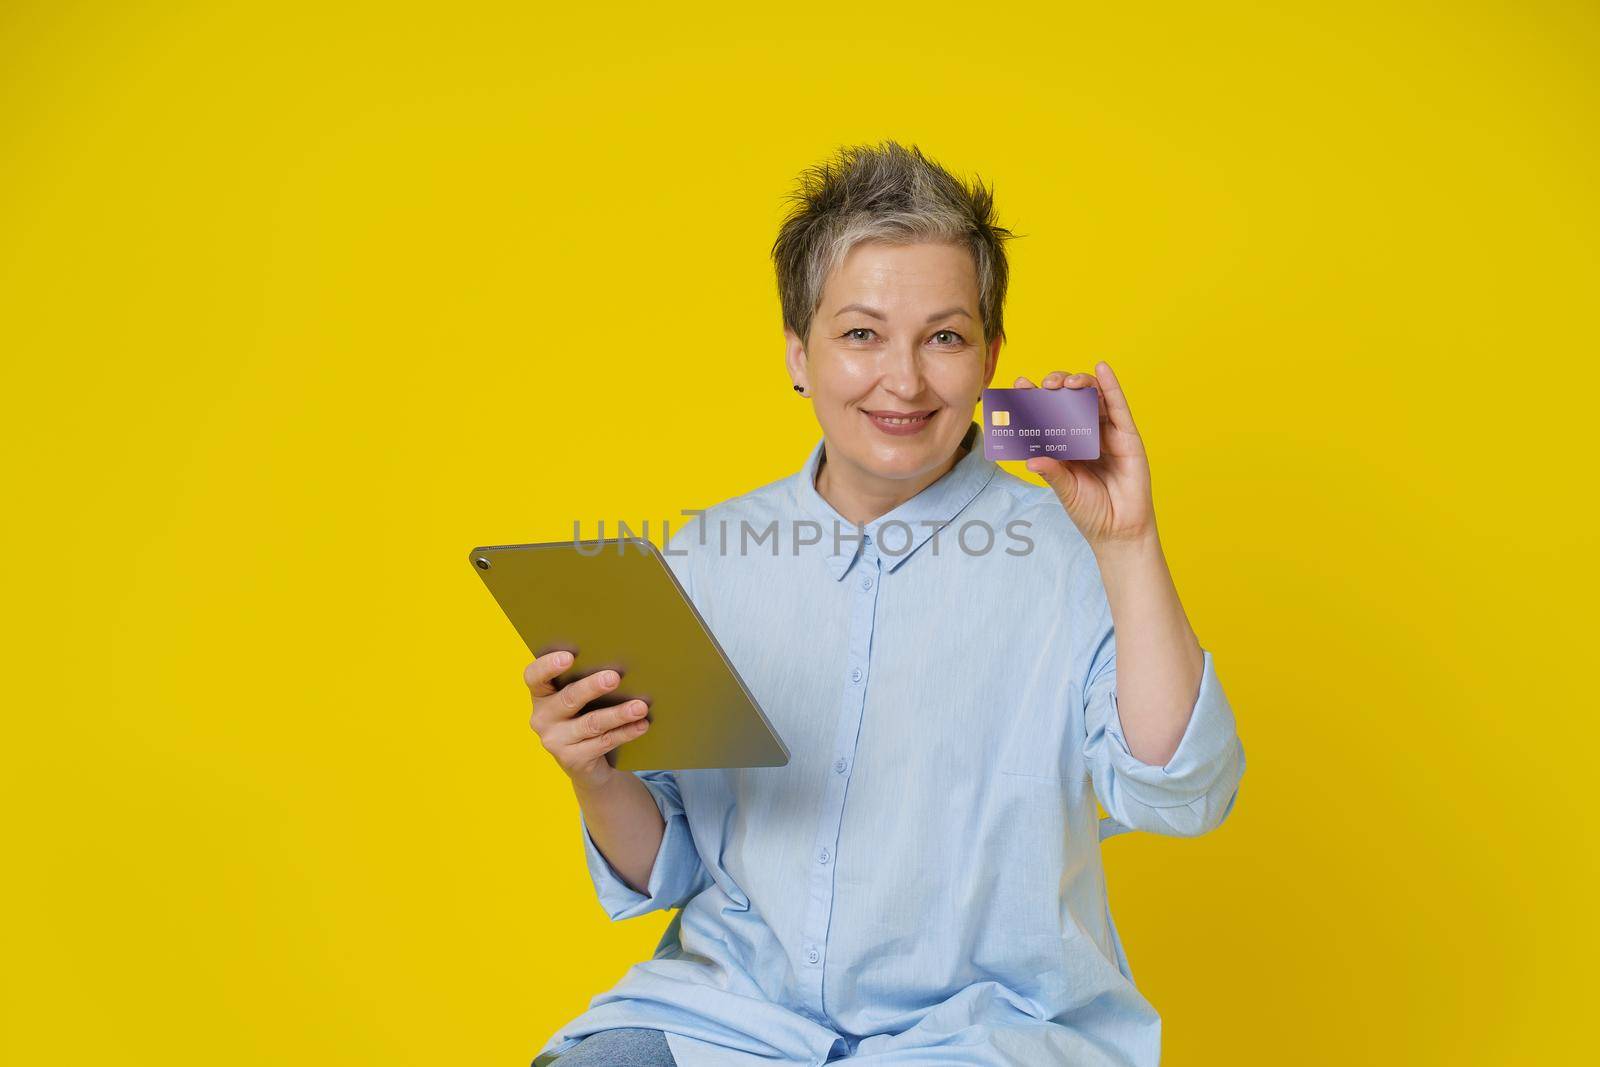 Mature woman with grey hair holding credit, debit card and tablet pc in hand making online payment or shopping online, isolated on yellow background. E-commerce, online banking concept.